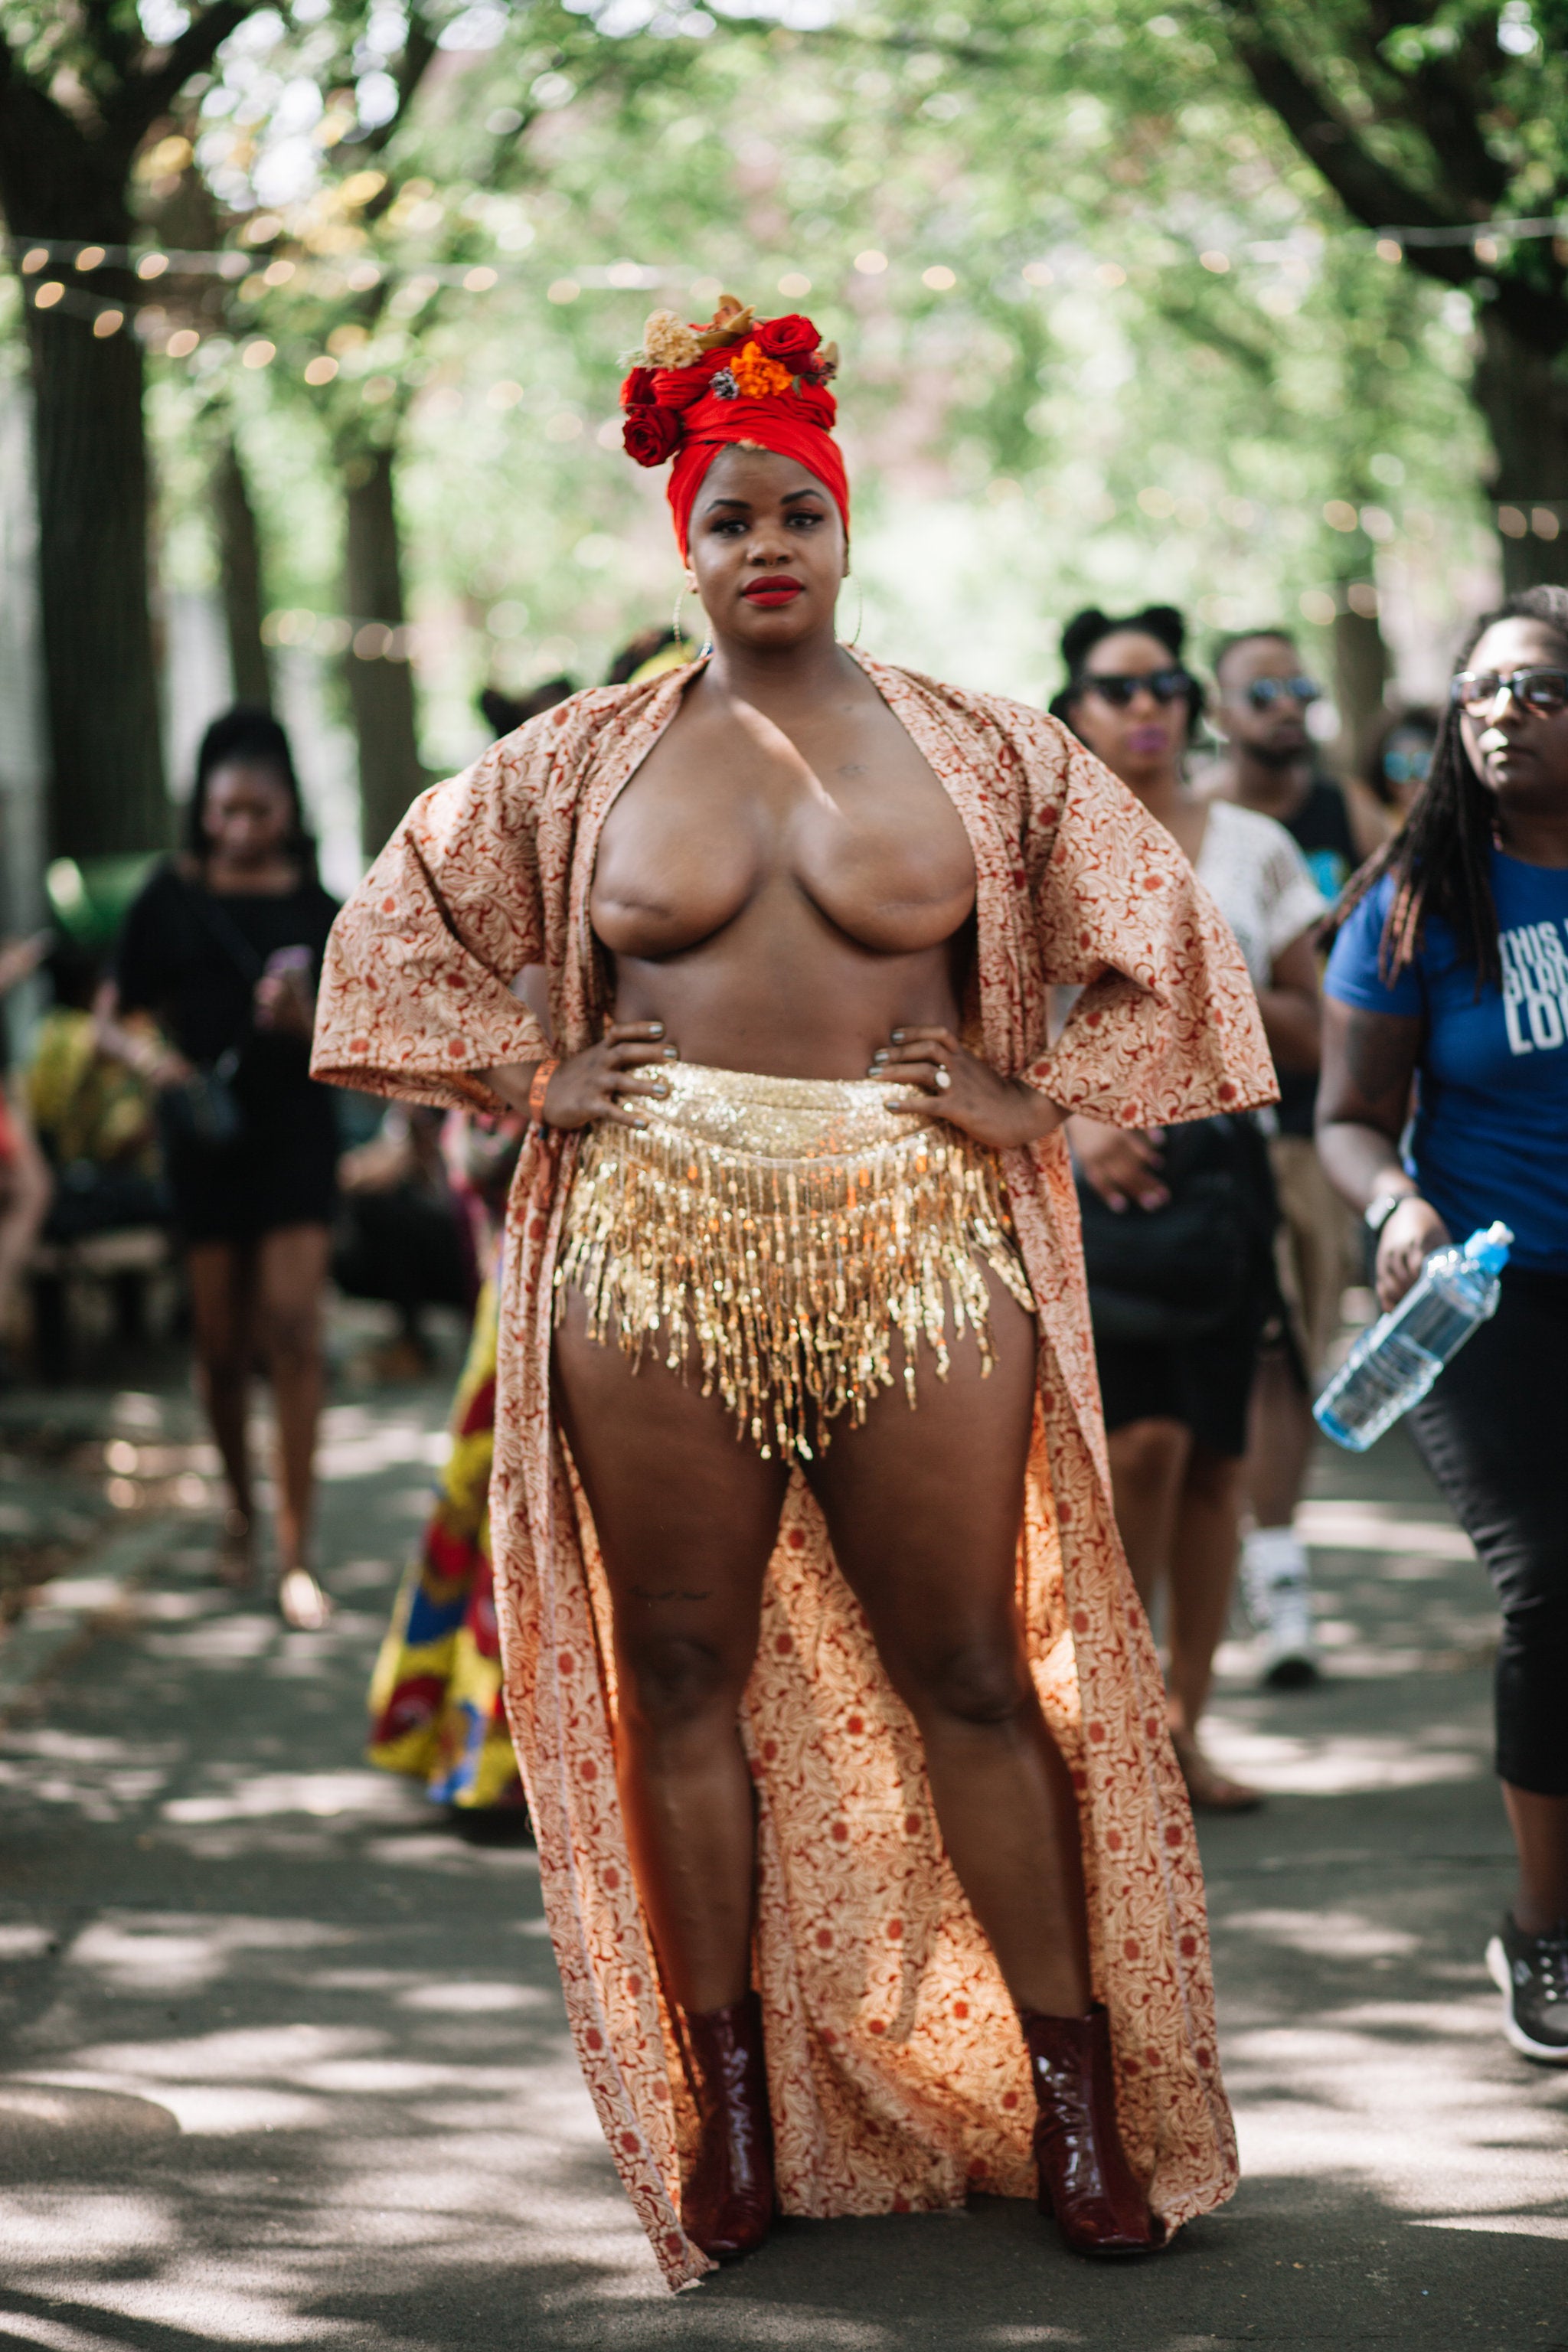 All The Street Style Stars At AFROPUNK Brooklyn 2017 We Can't Stop Staring At
